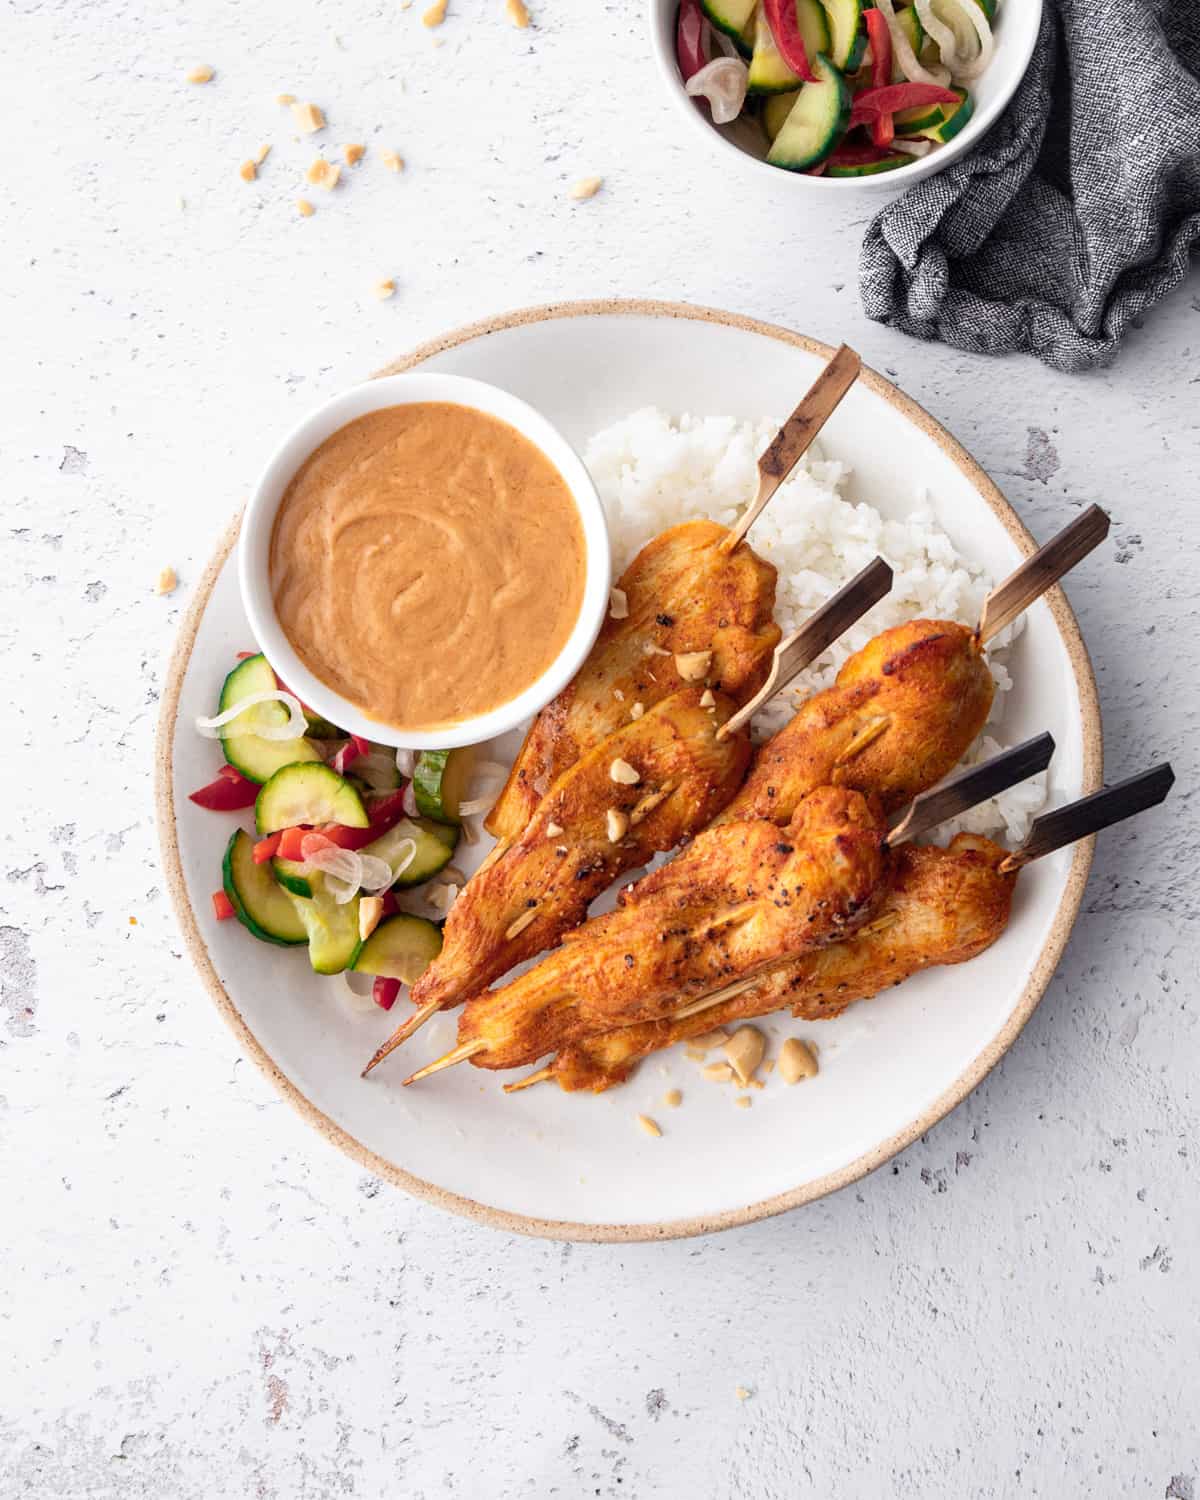 chicken satay, rice, pickles and peanut sauce on a white plate